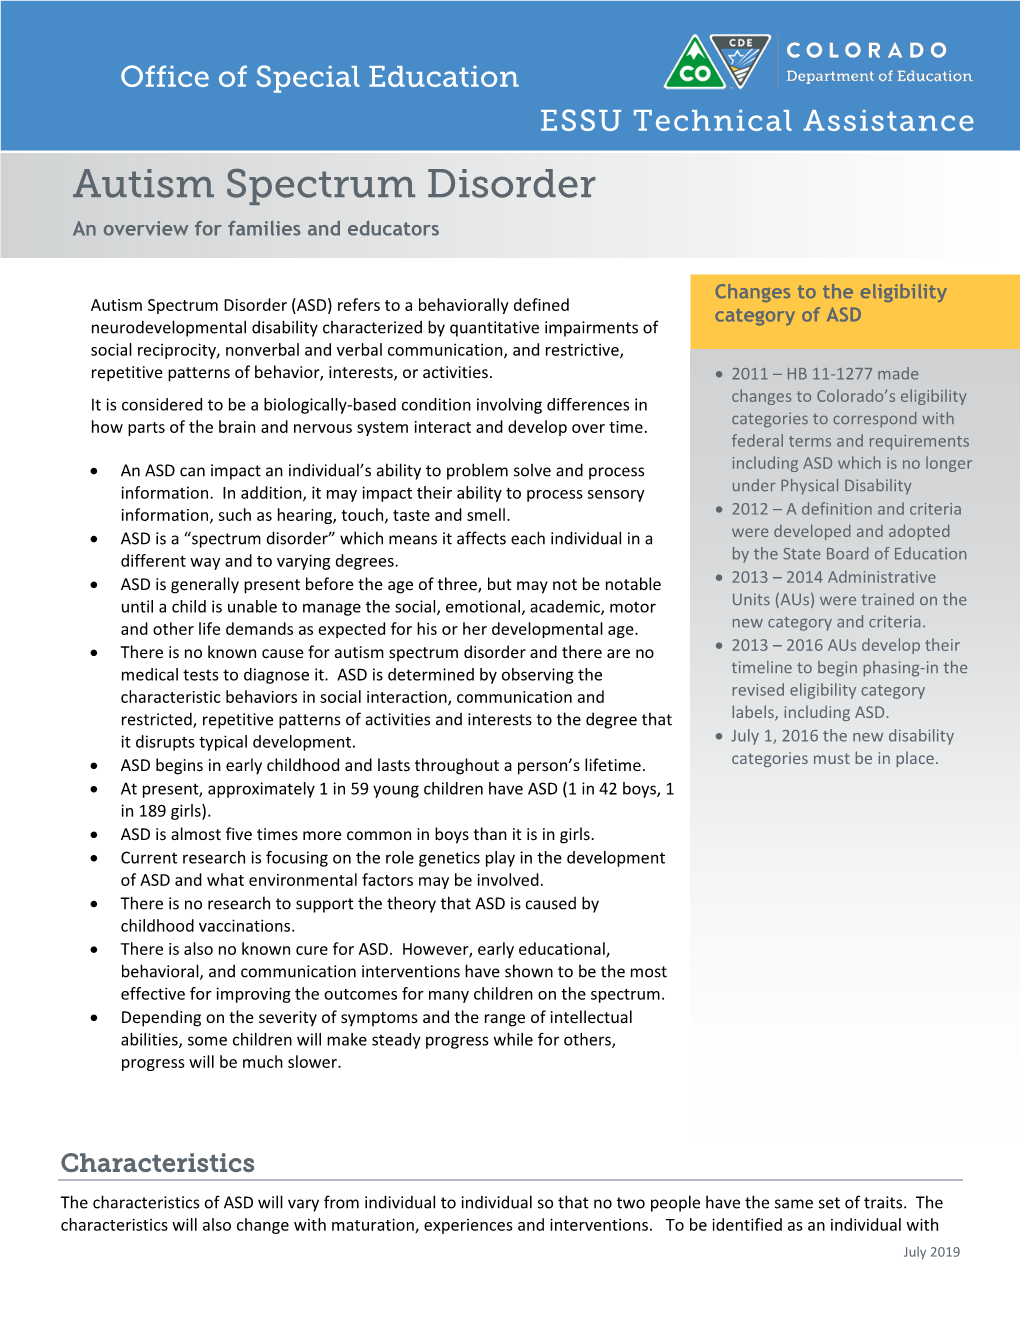 Autism Spectrum Disorder an Overview for Families and Educators